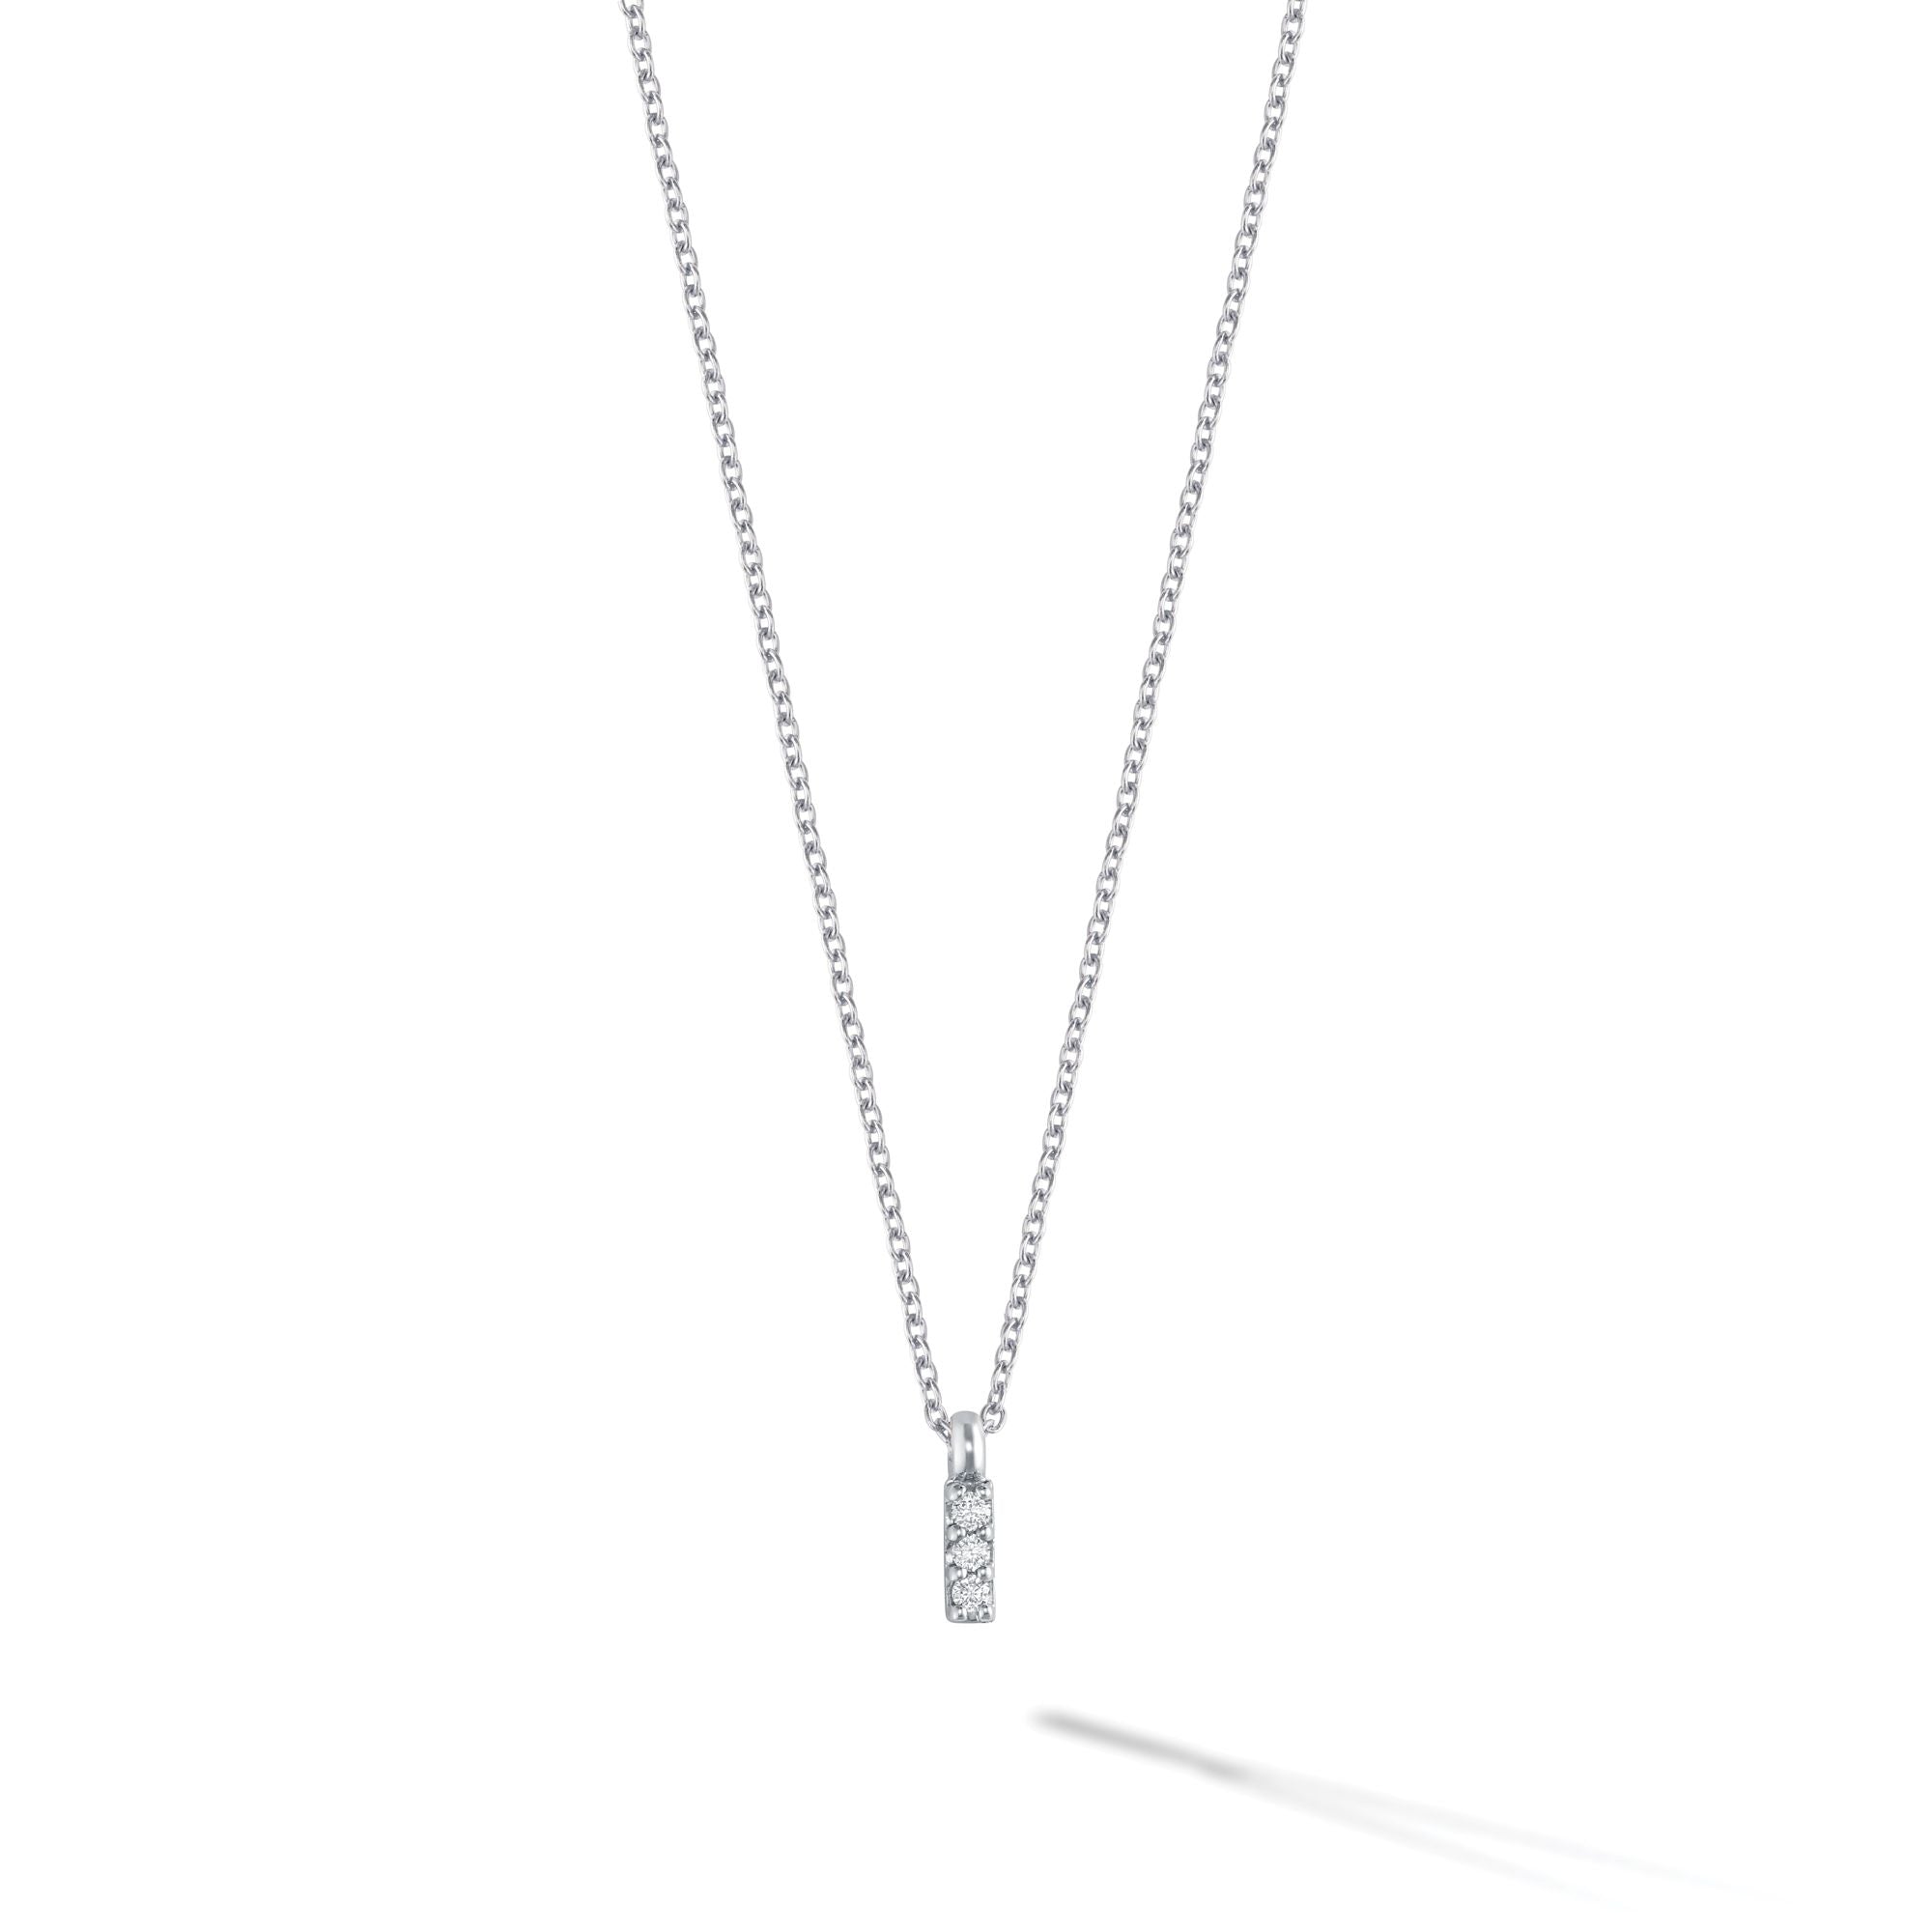 Birks Silver Heart Necklace with Pearl